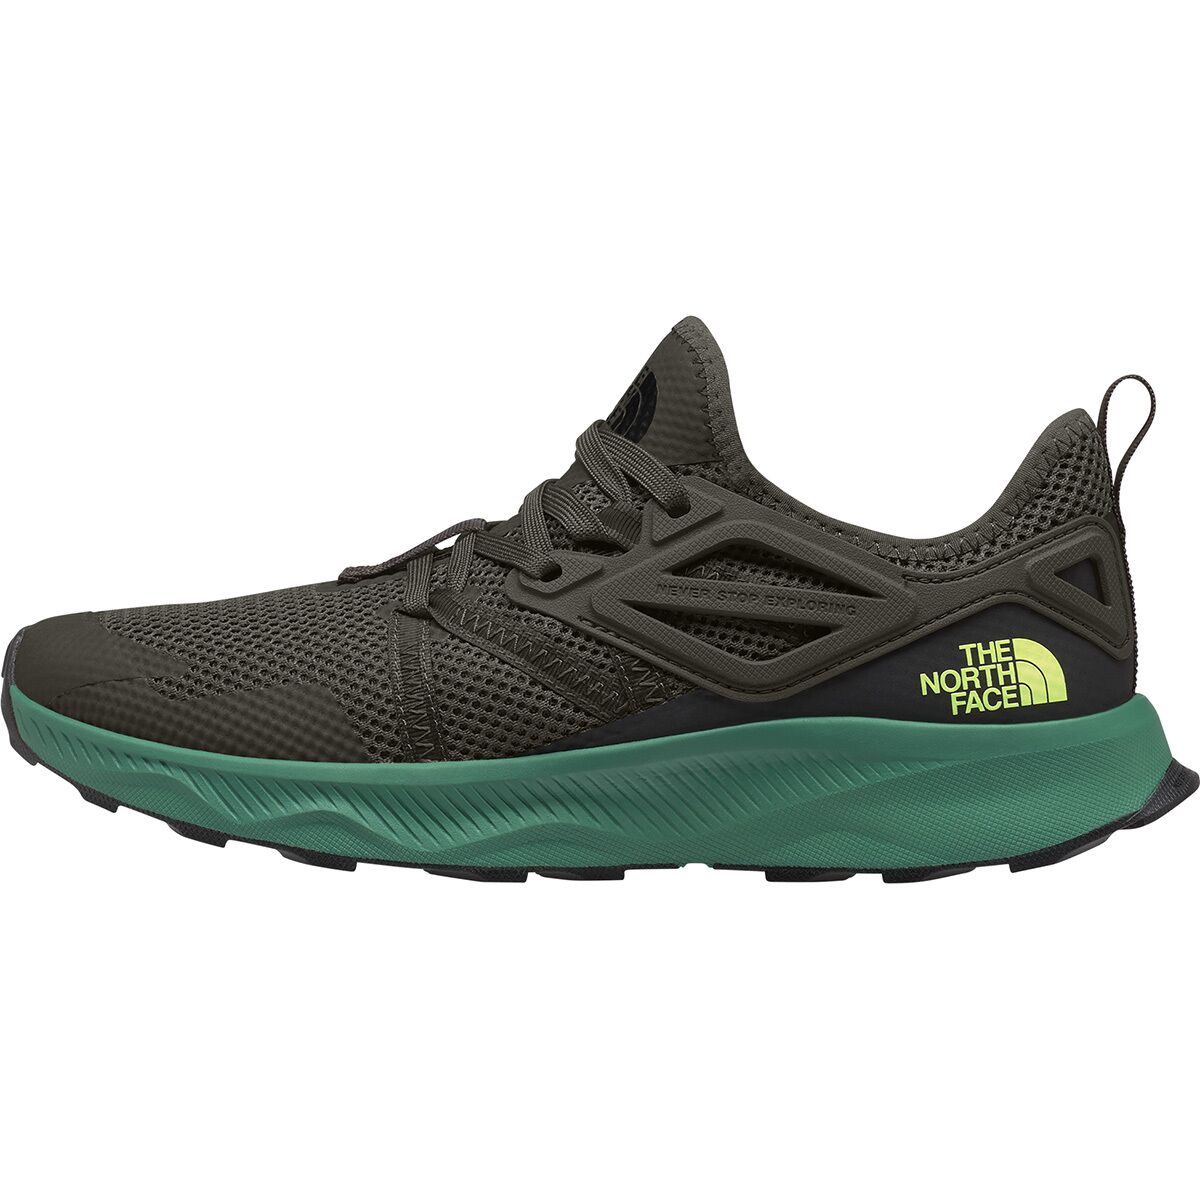 The North Face Oxeye Hiking Shoe - Men's